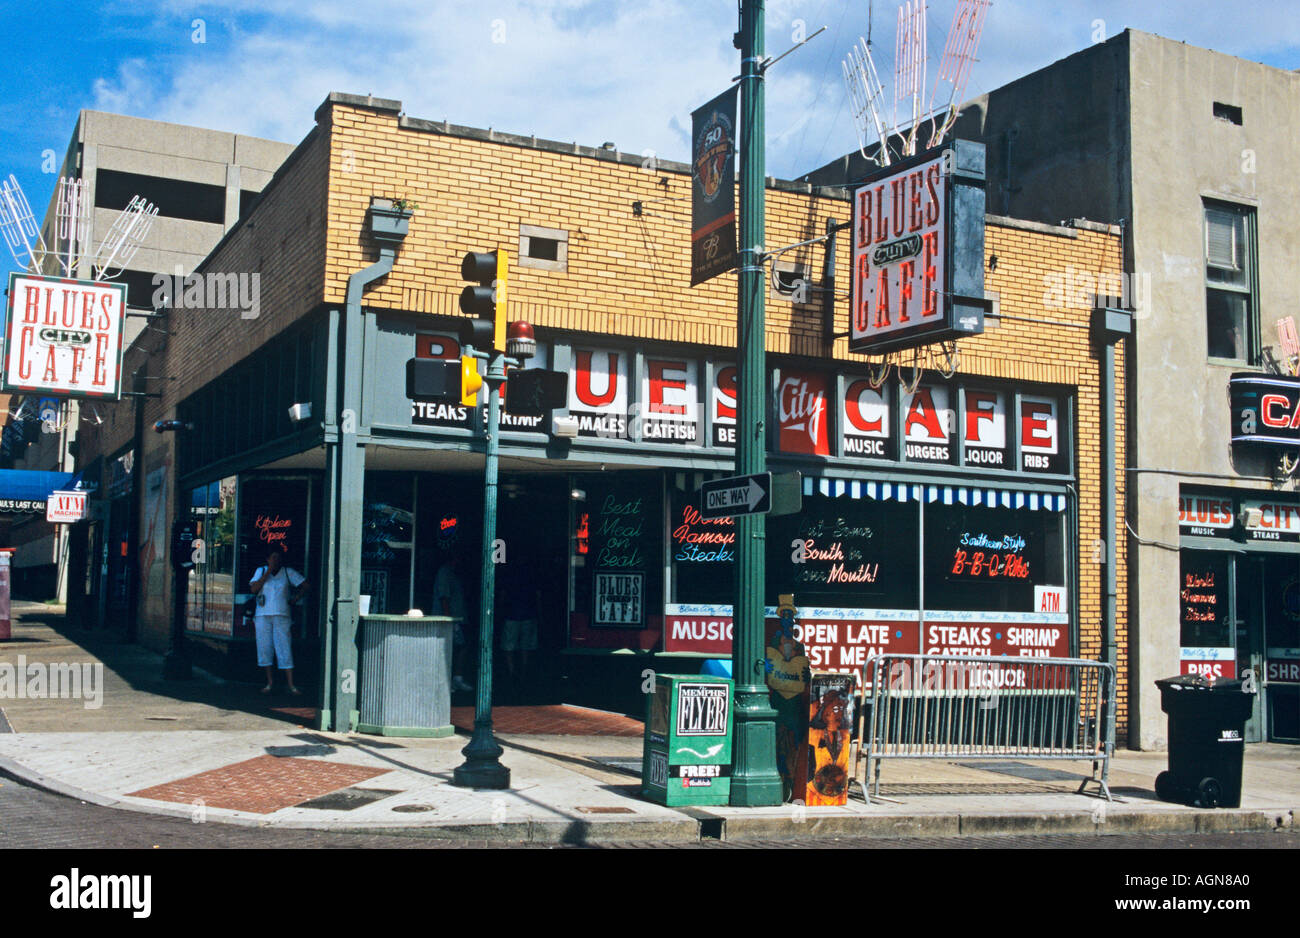 Blues Cafe di Beale Street a Memphis, Tennessee Foto Stock